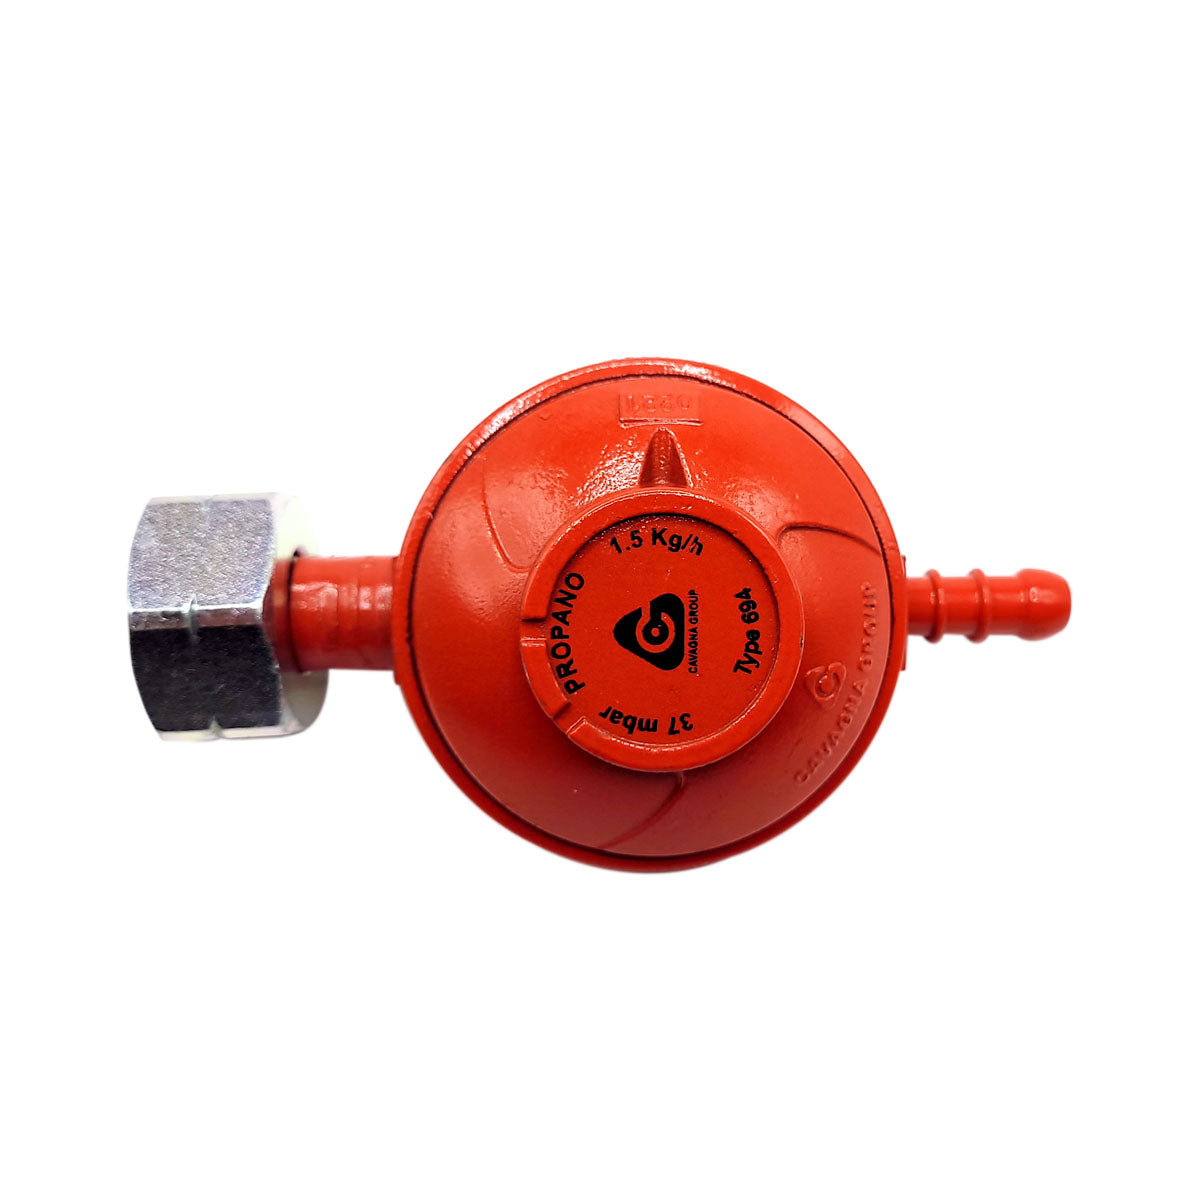 Low Pressure Propane Gas Regulator 37mbar 1.5kg/hr With Union Nut